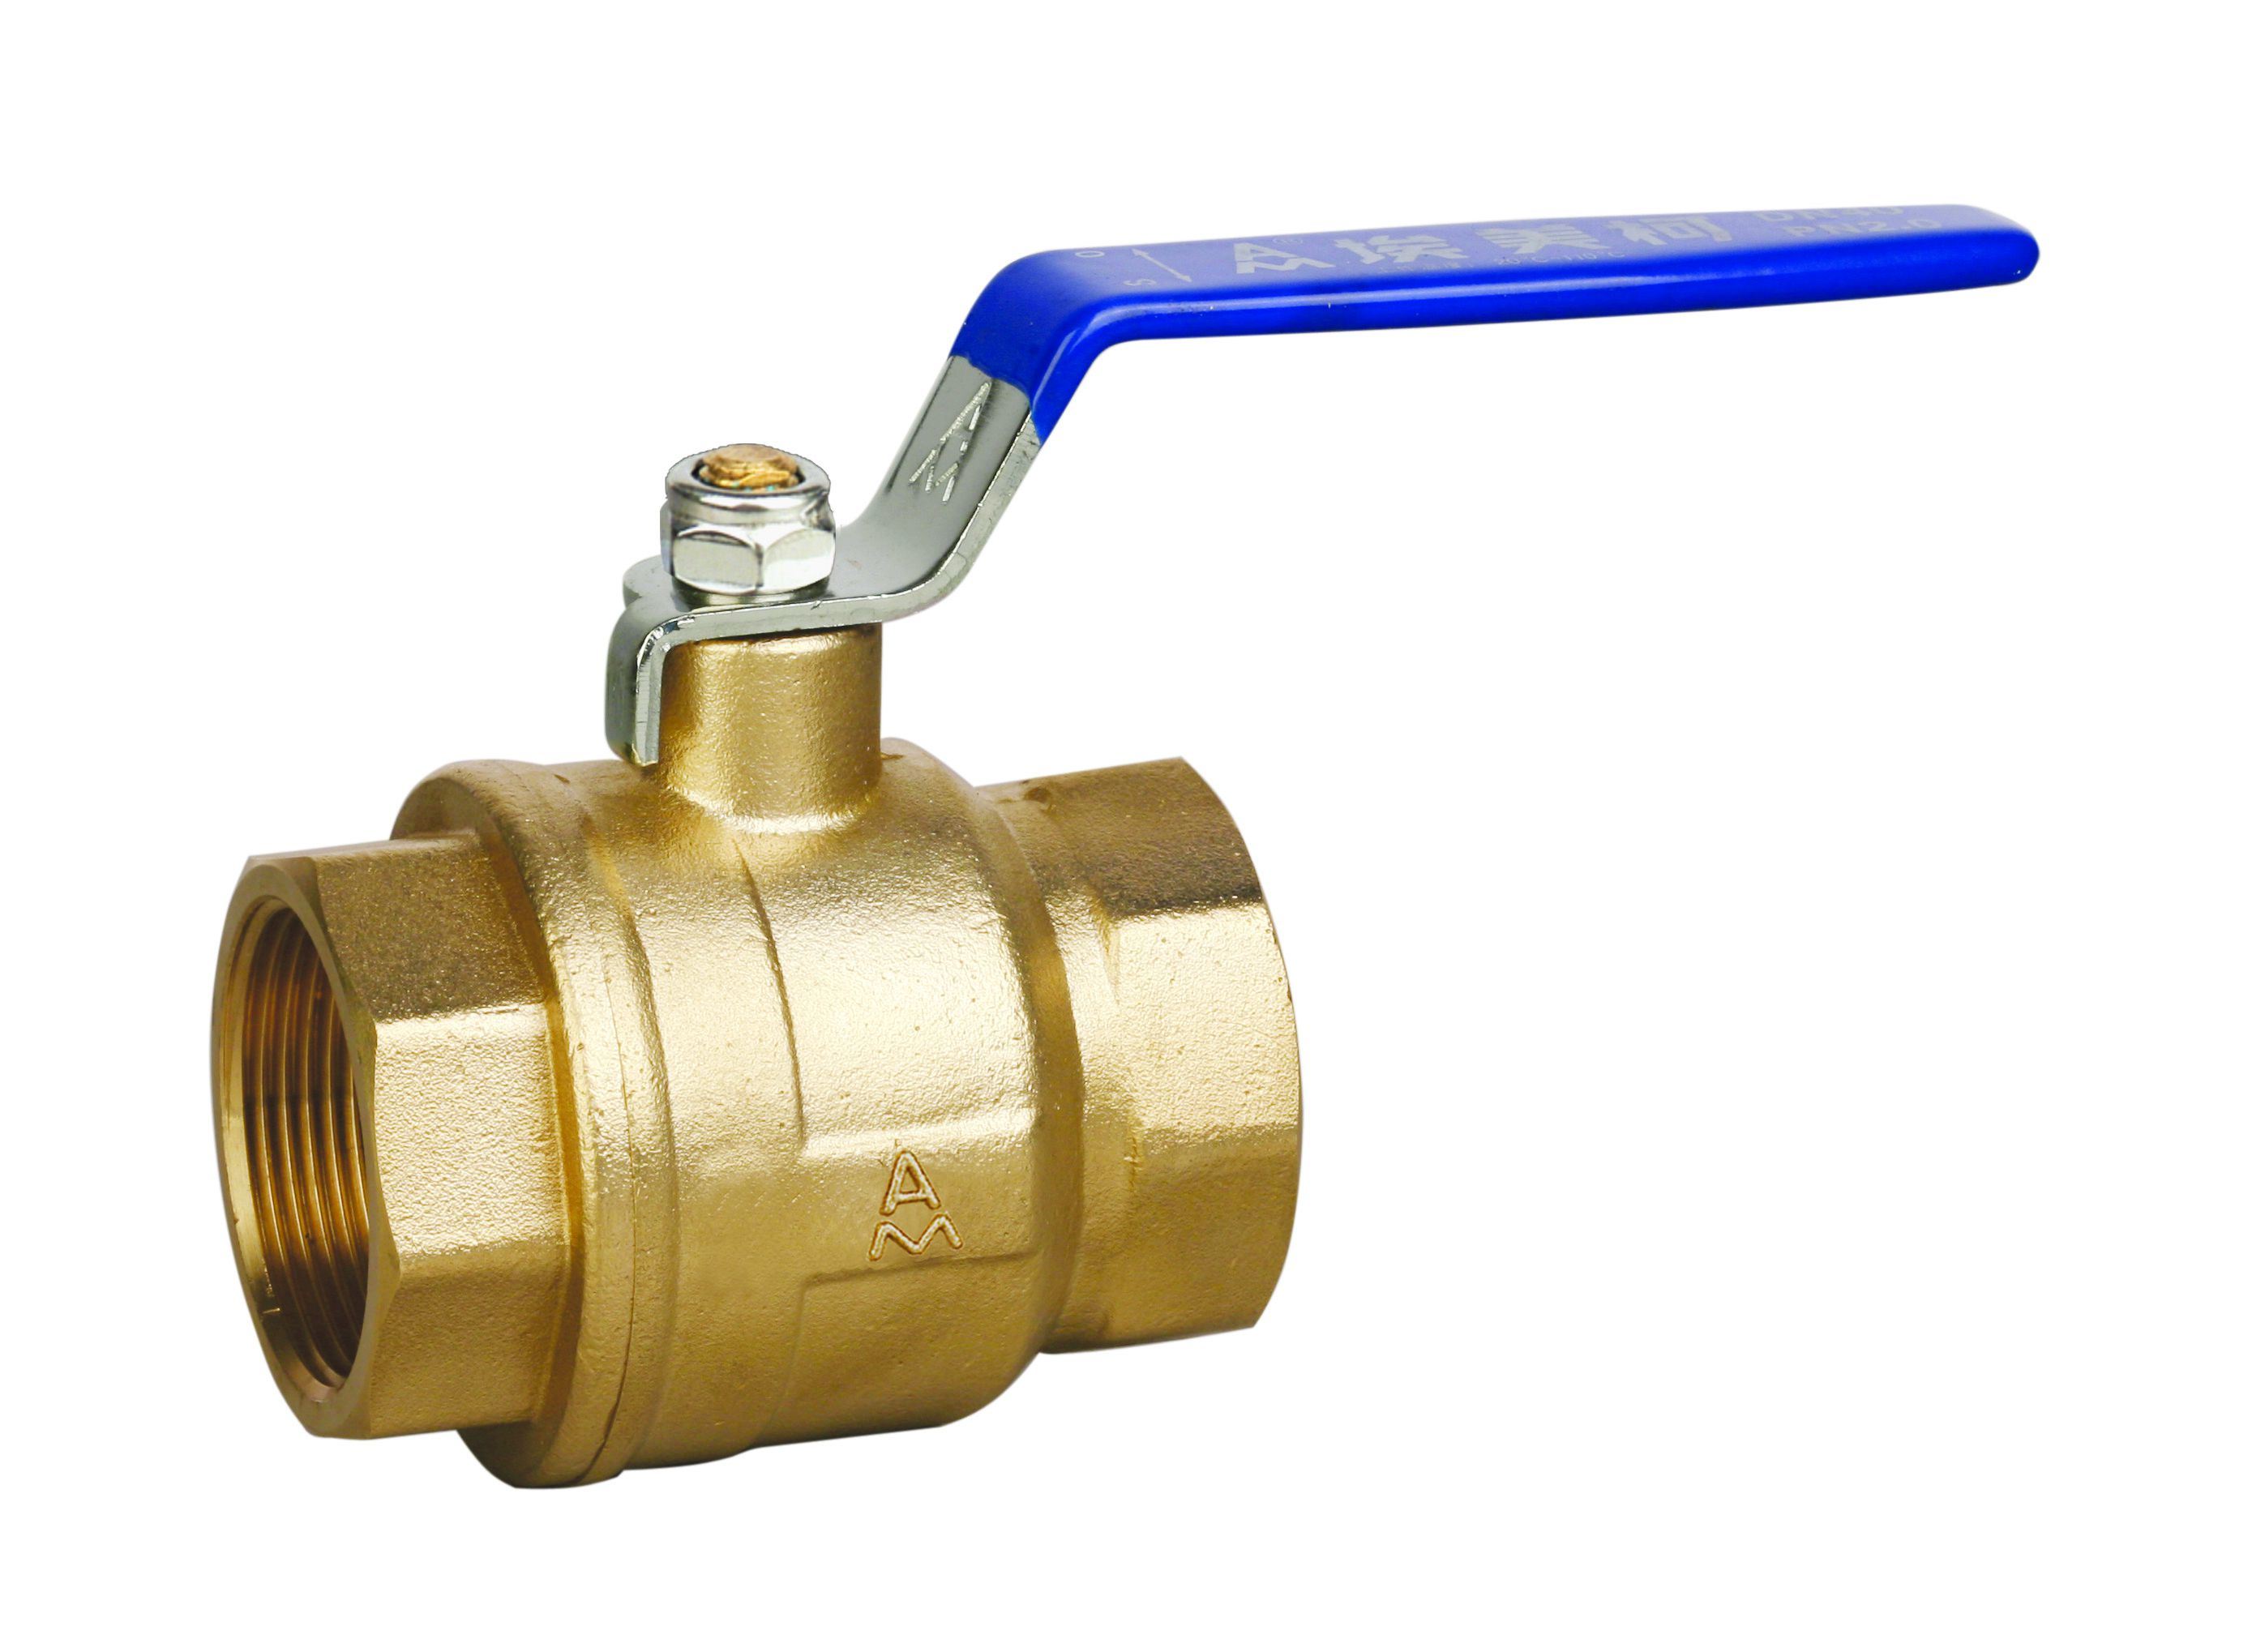 China Brass Ball Valve Supplier/Famous Valve Brand in China